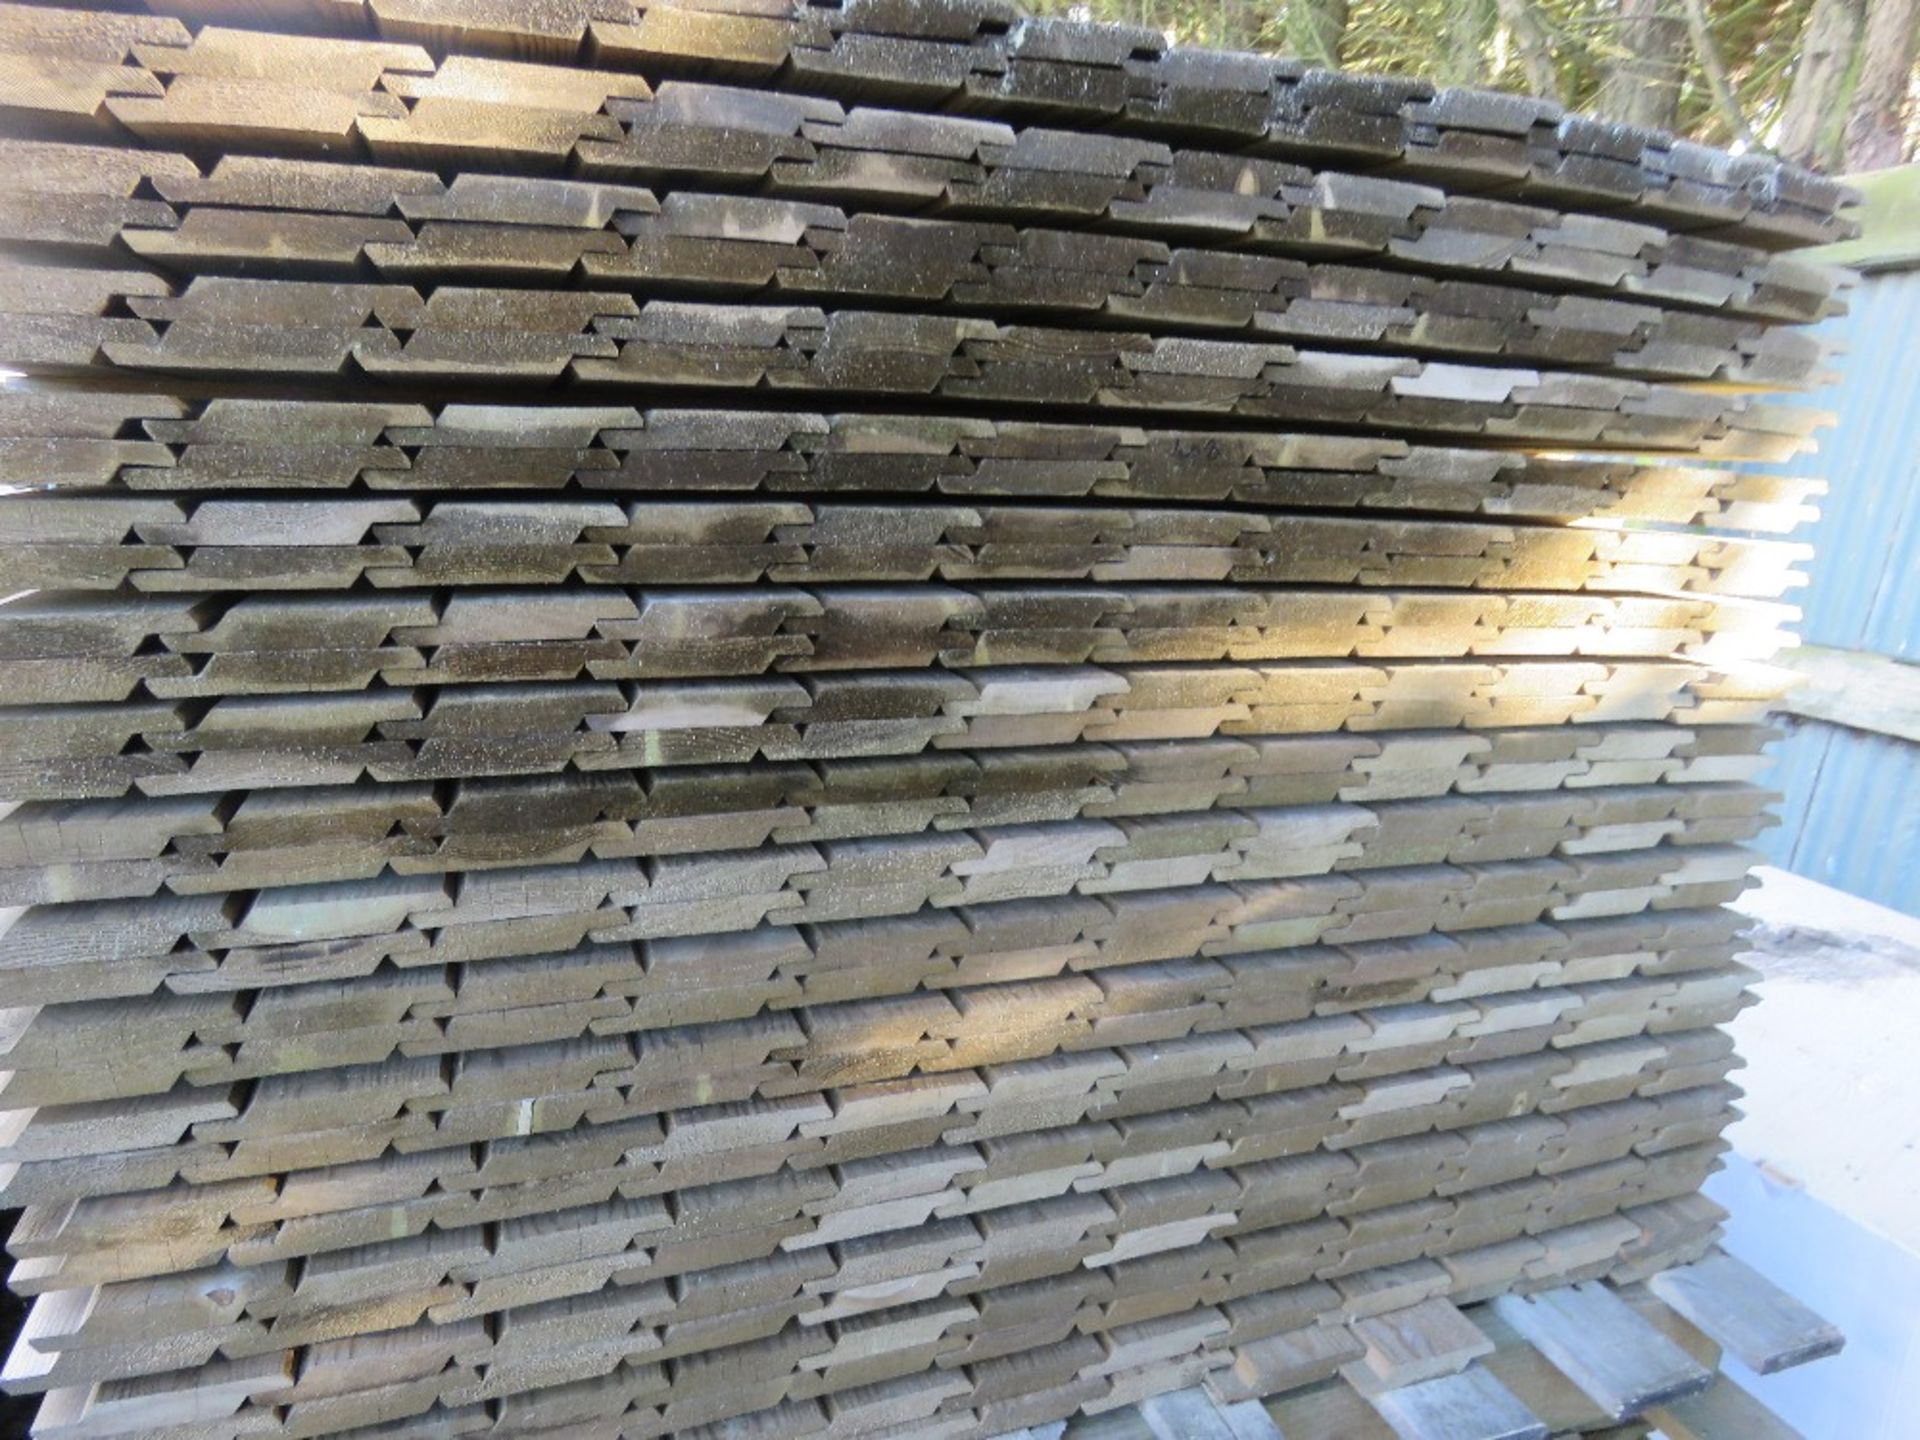 2 X PALLETS OF SHIPLAP PRESSURE TREATED FENCE CLADDING TIMBER BOARDS. 1.02M LENGTH X 95MM WIDTH APP - Image 2 of 4